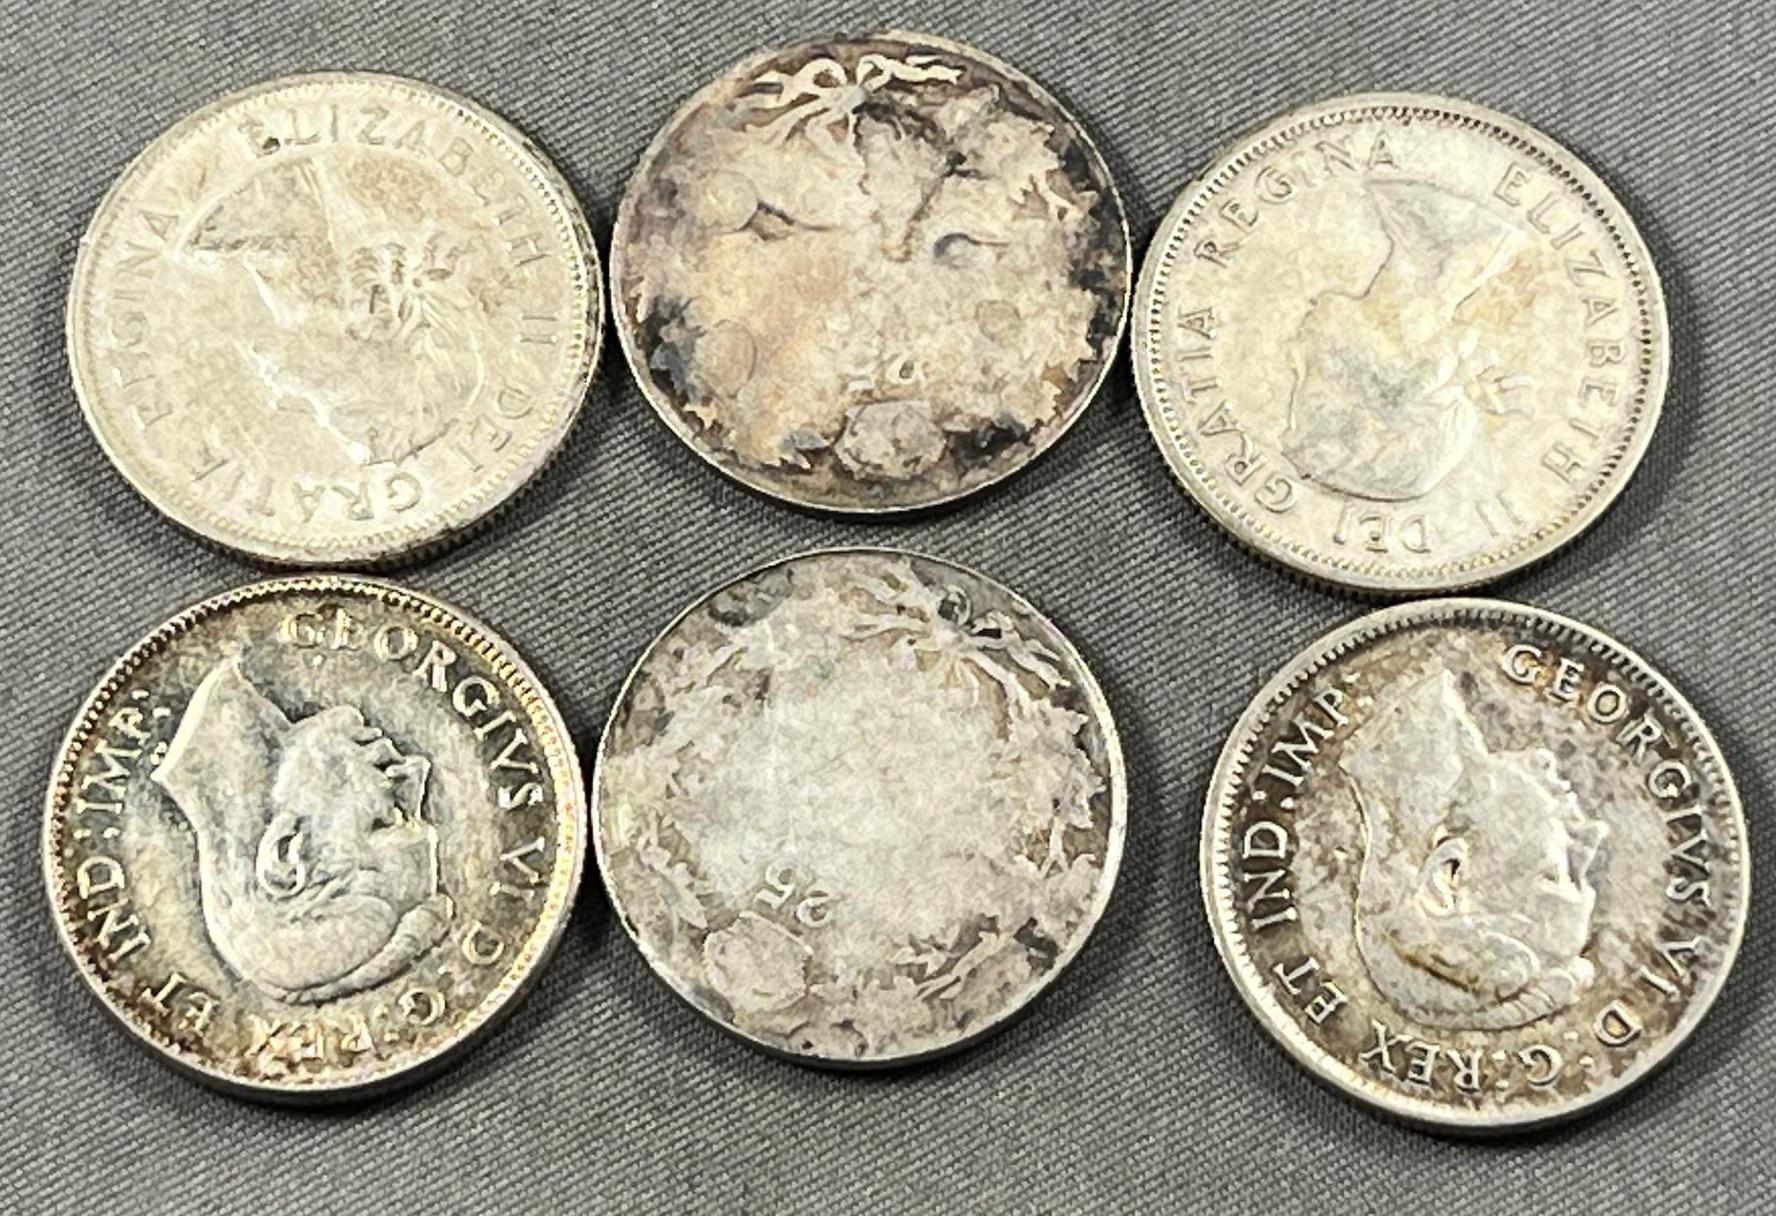 6- Silver Canadian Quarters, 2 are sterling silver